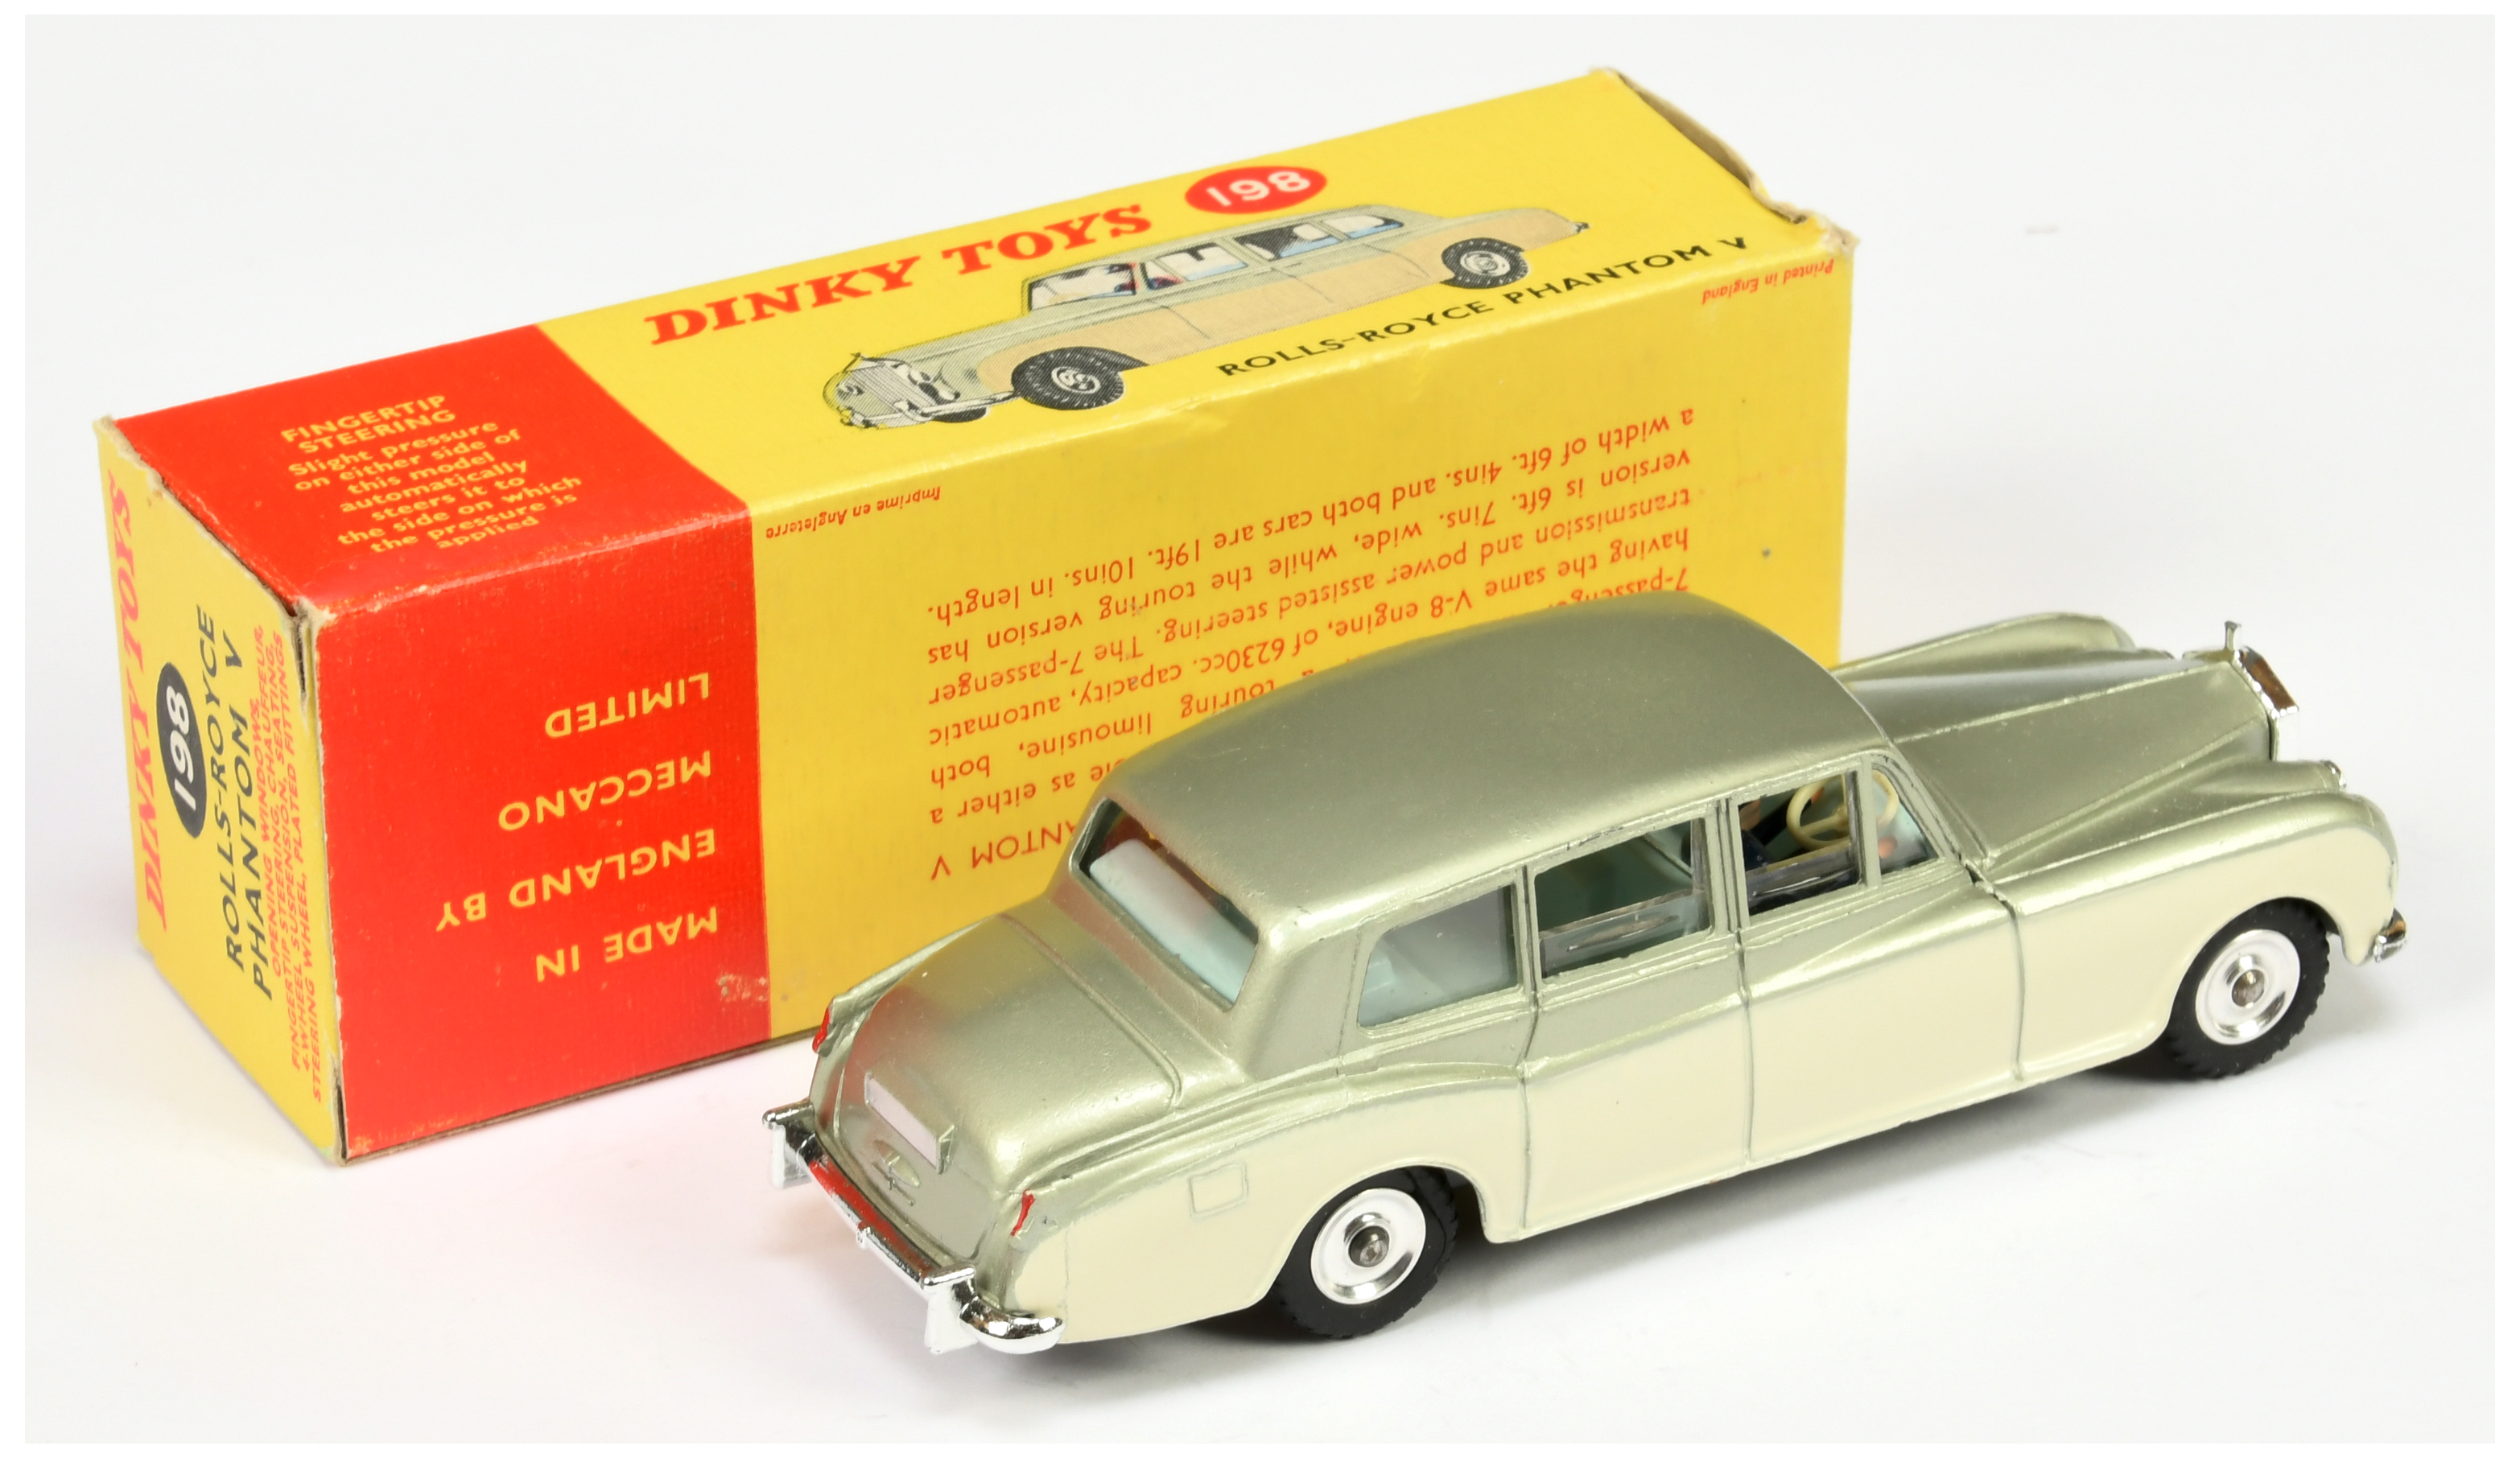 Dinky Toys 198 Rolls Royce Phantom V - Two-Tone Metallic green and cream, pale blue interior with... - Image 2 of 2